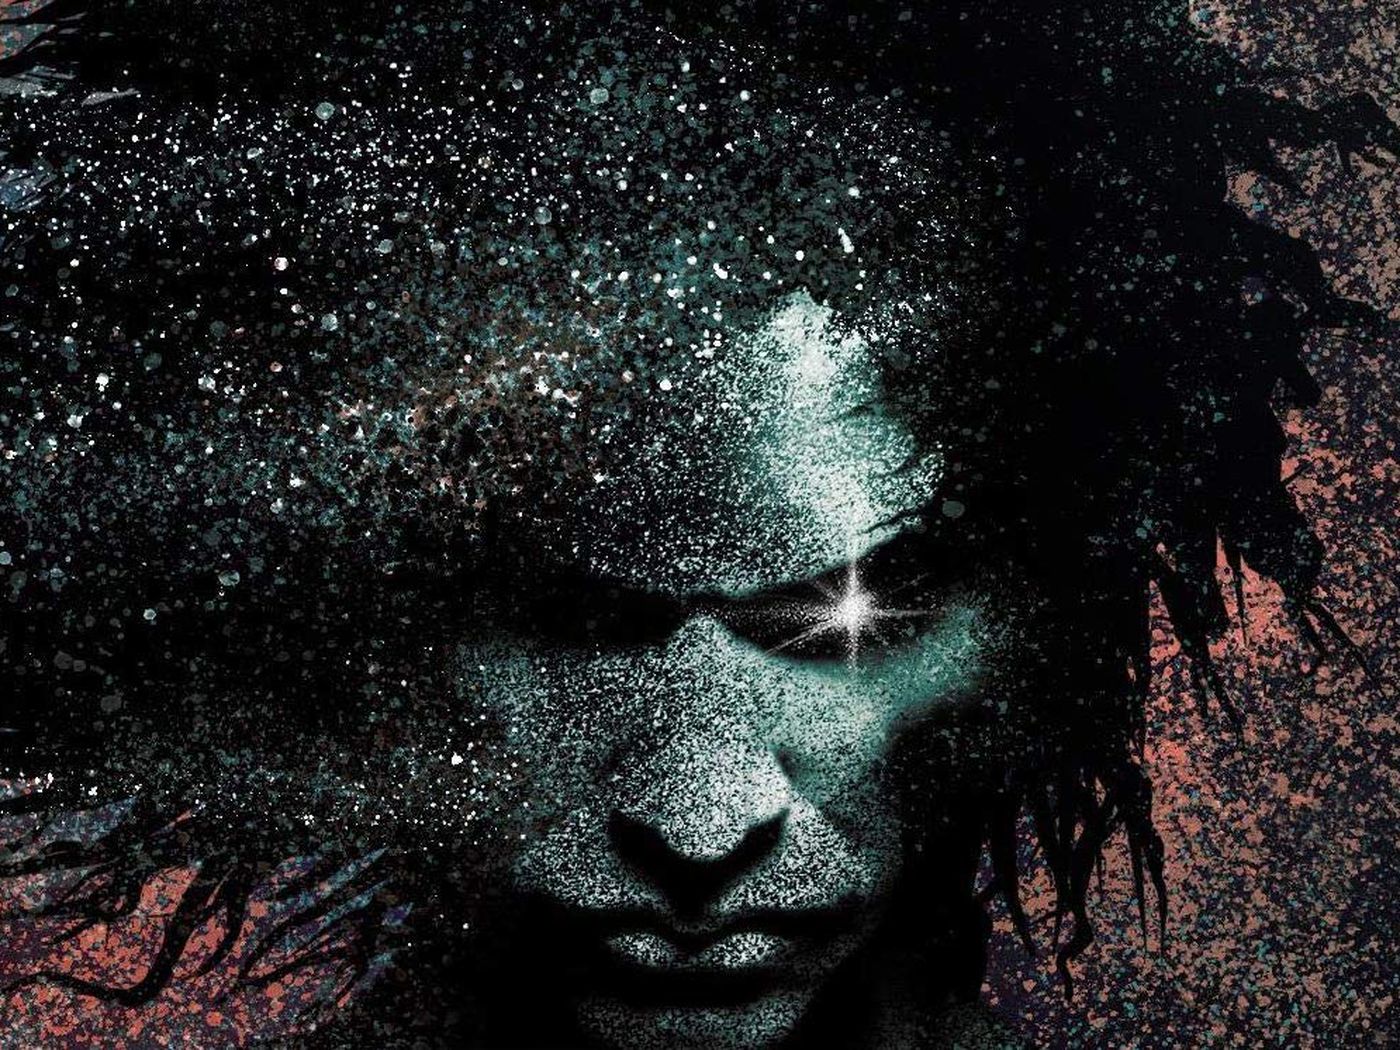 Neil Gaiman: All of Sandman coming to Audible for the 'comics impaired'